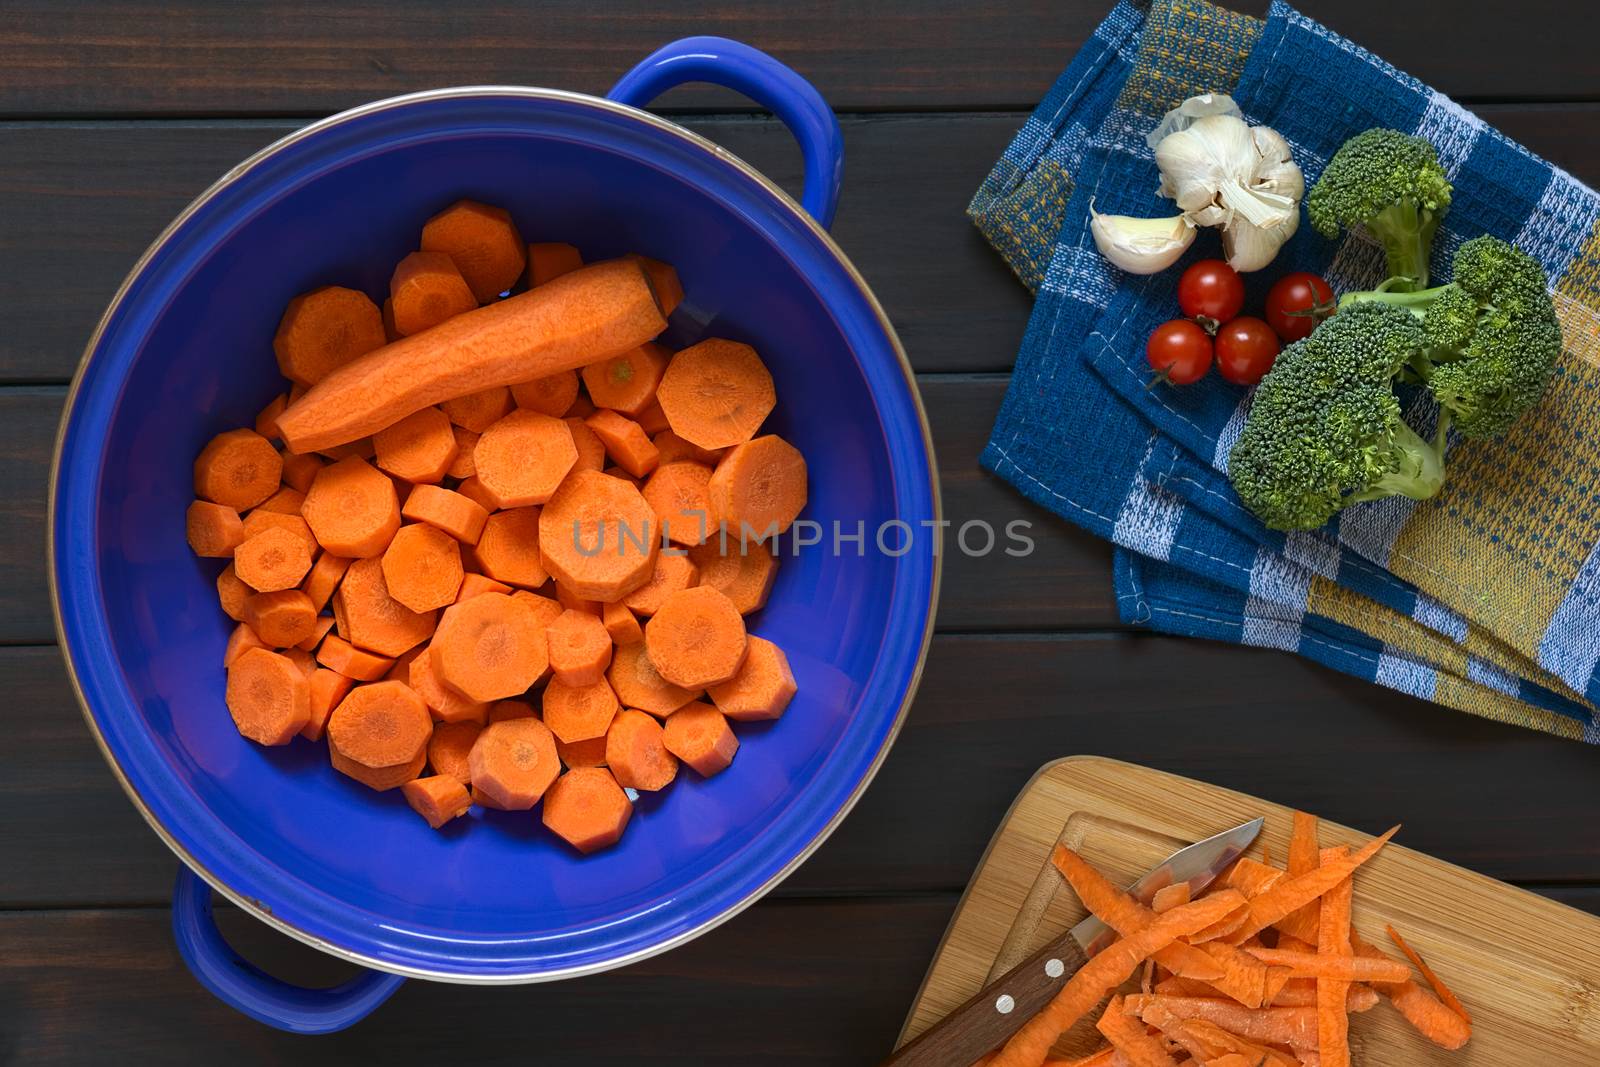 Overhead shot of fresh raw sliced carrot in blue metal strainer with broccoli, cherry tomato, garlic and carrot peels on the side, photographed on dark wood with natural light